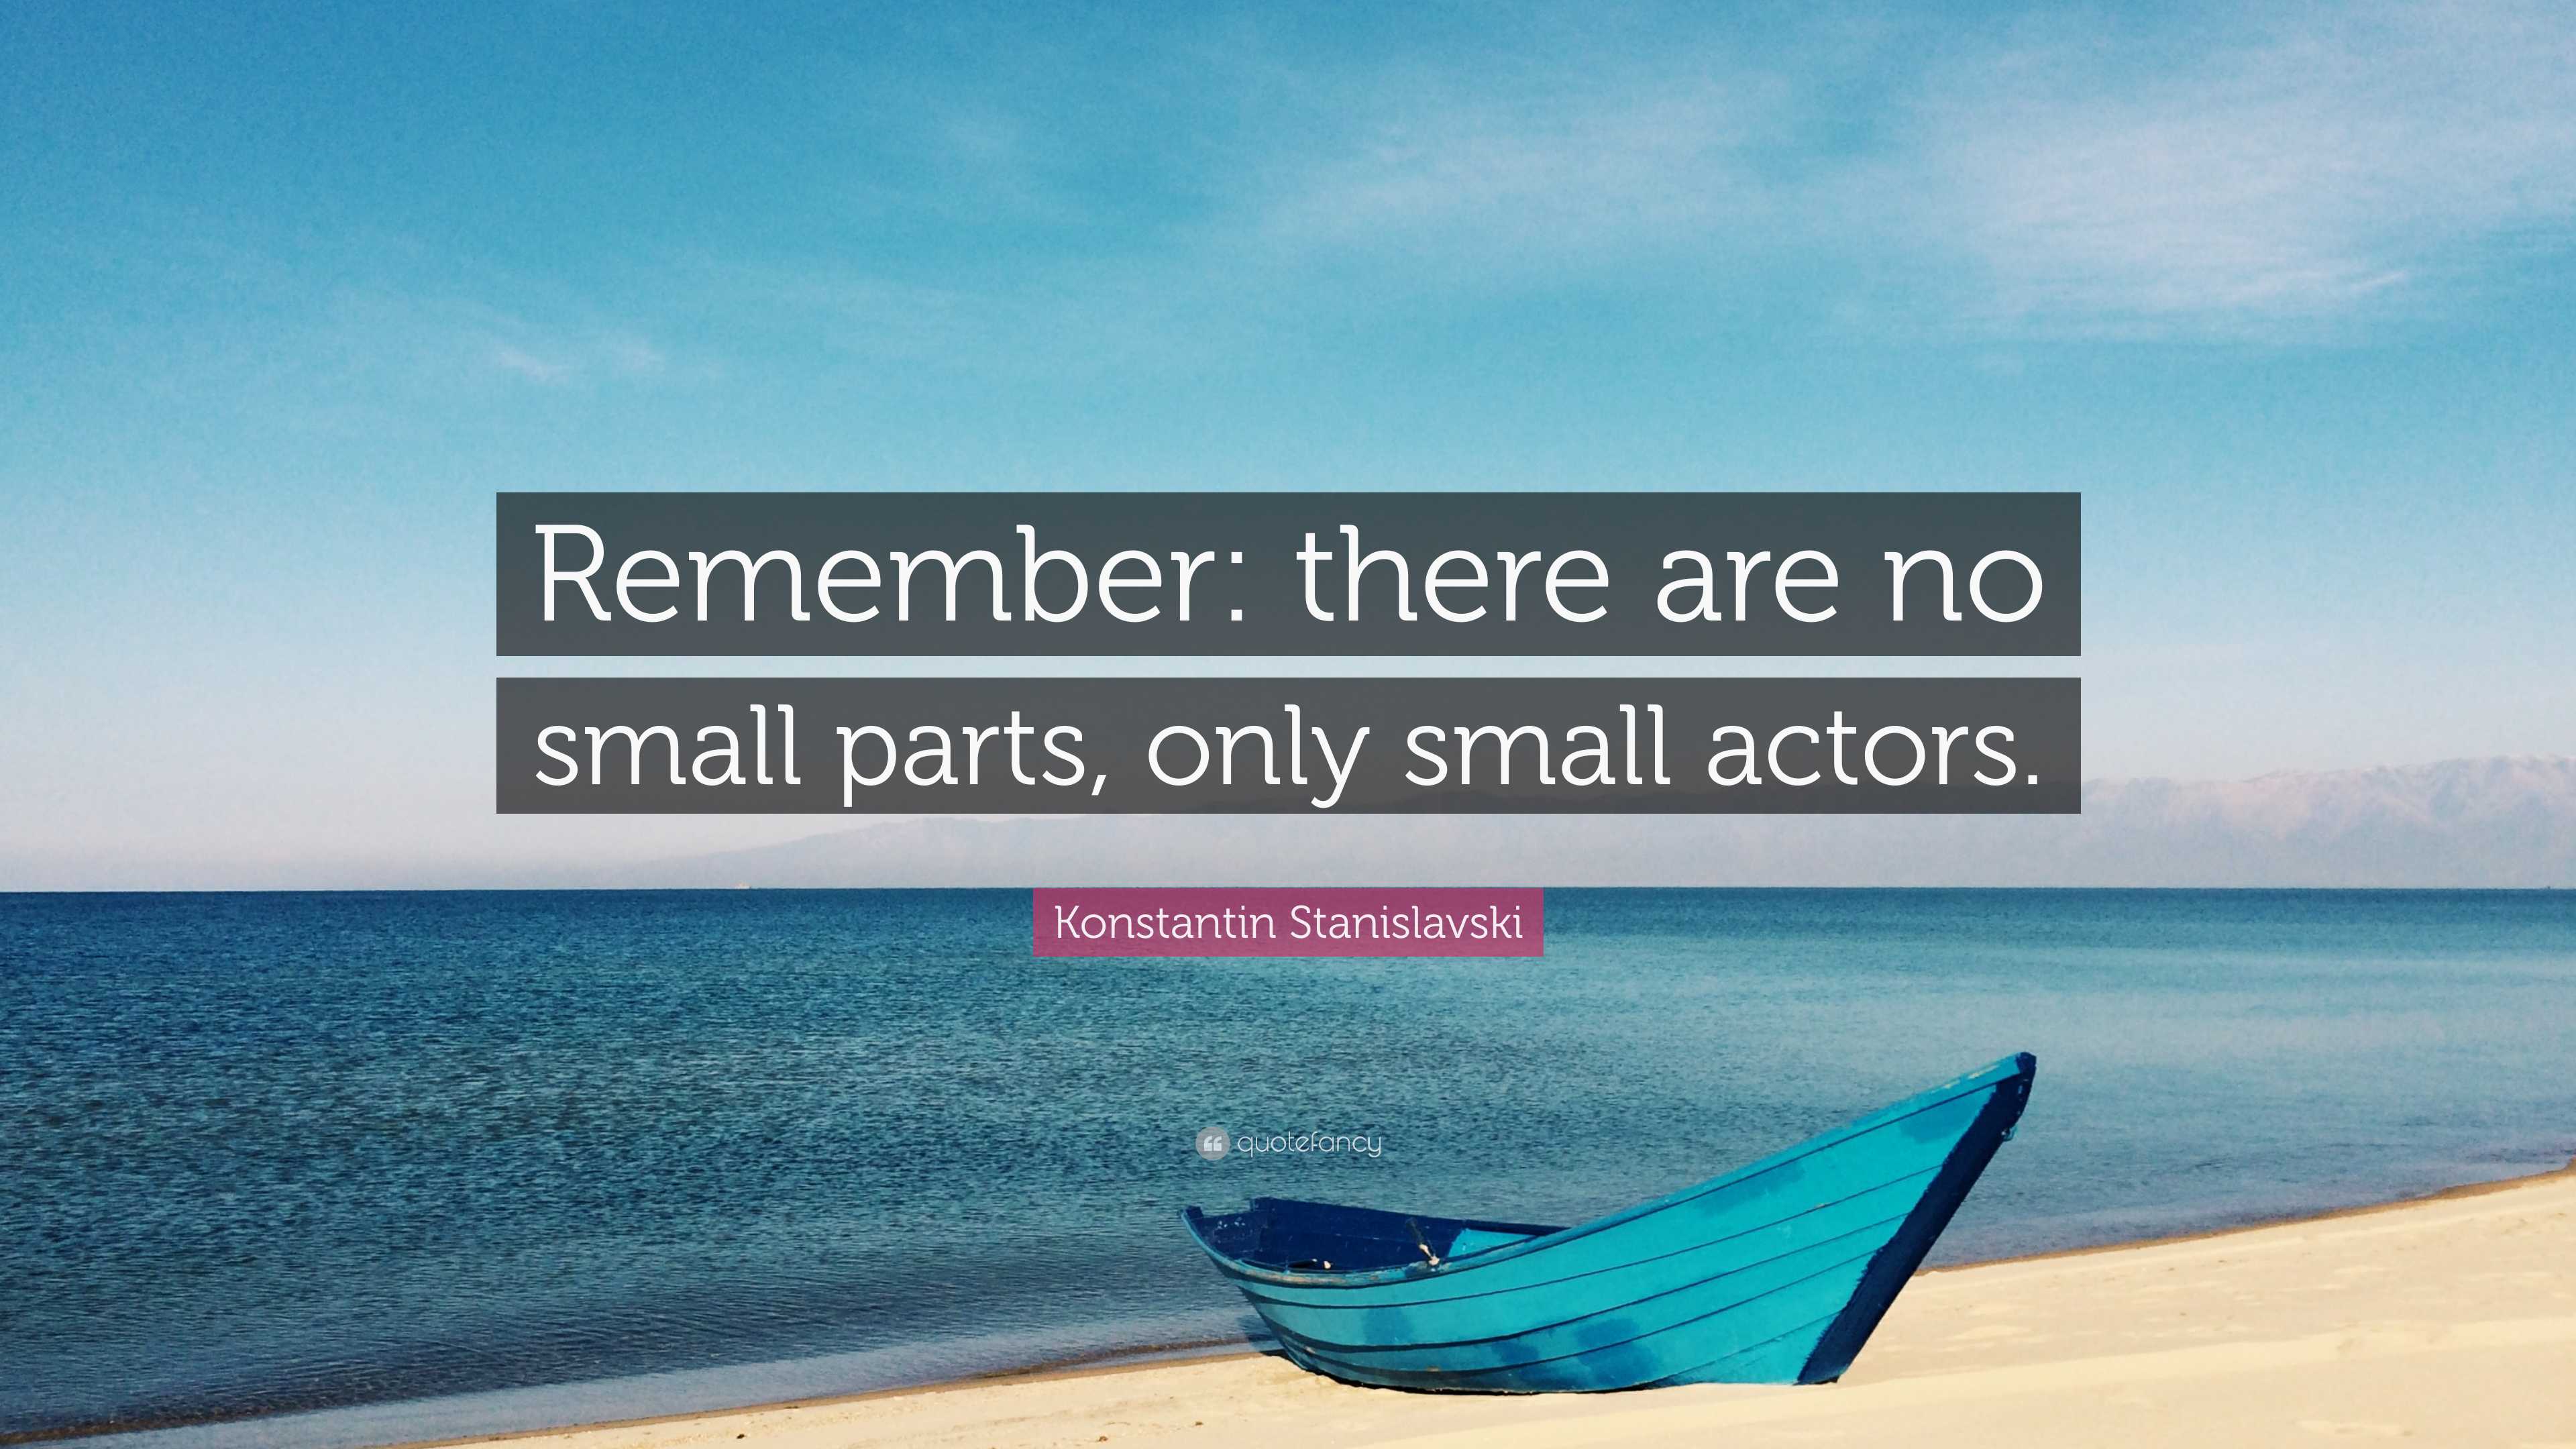 Konstantin Stanislavski Quote “remember There Are No Small Parts Only Small Actors” 